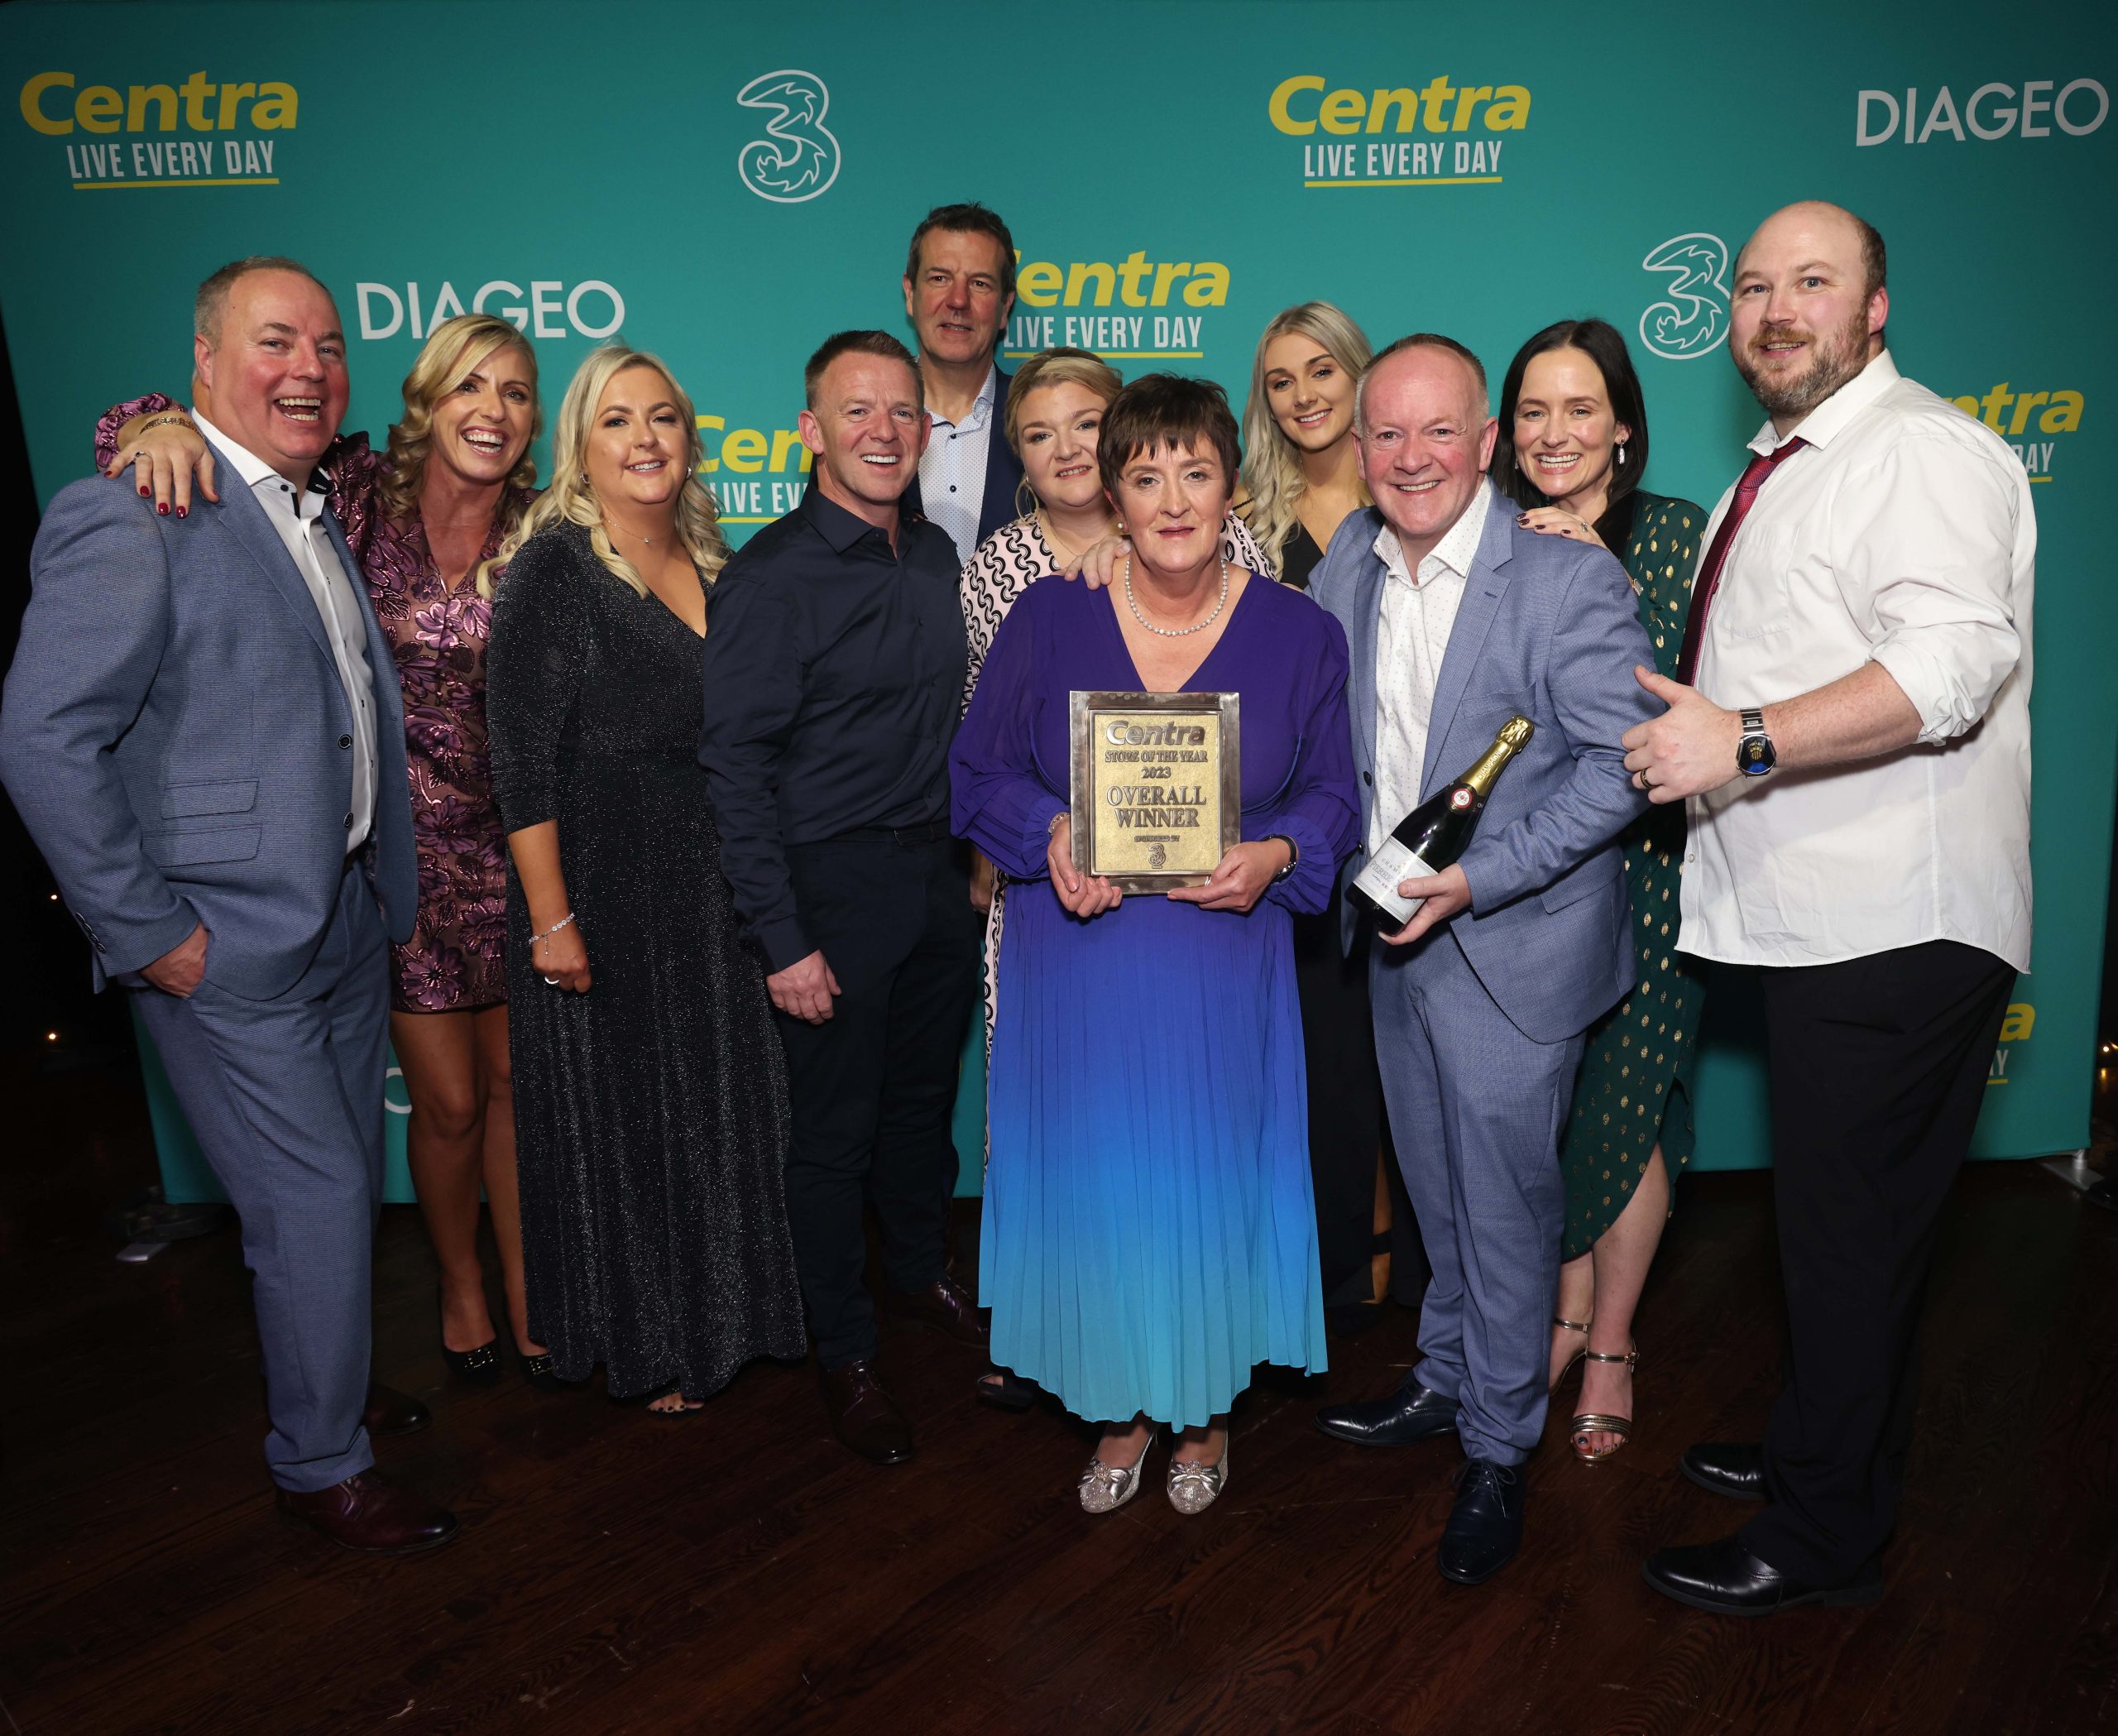 Lee’s Centra Pallas Green Limerick has been named as the best Centra in Ireland